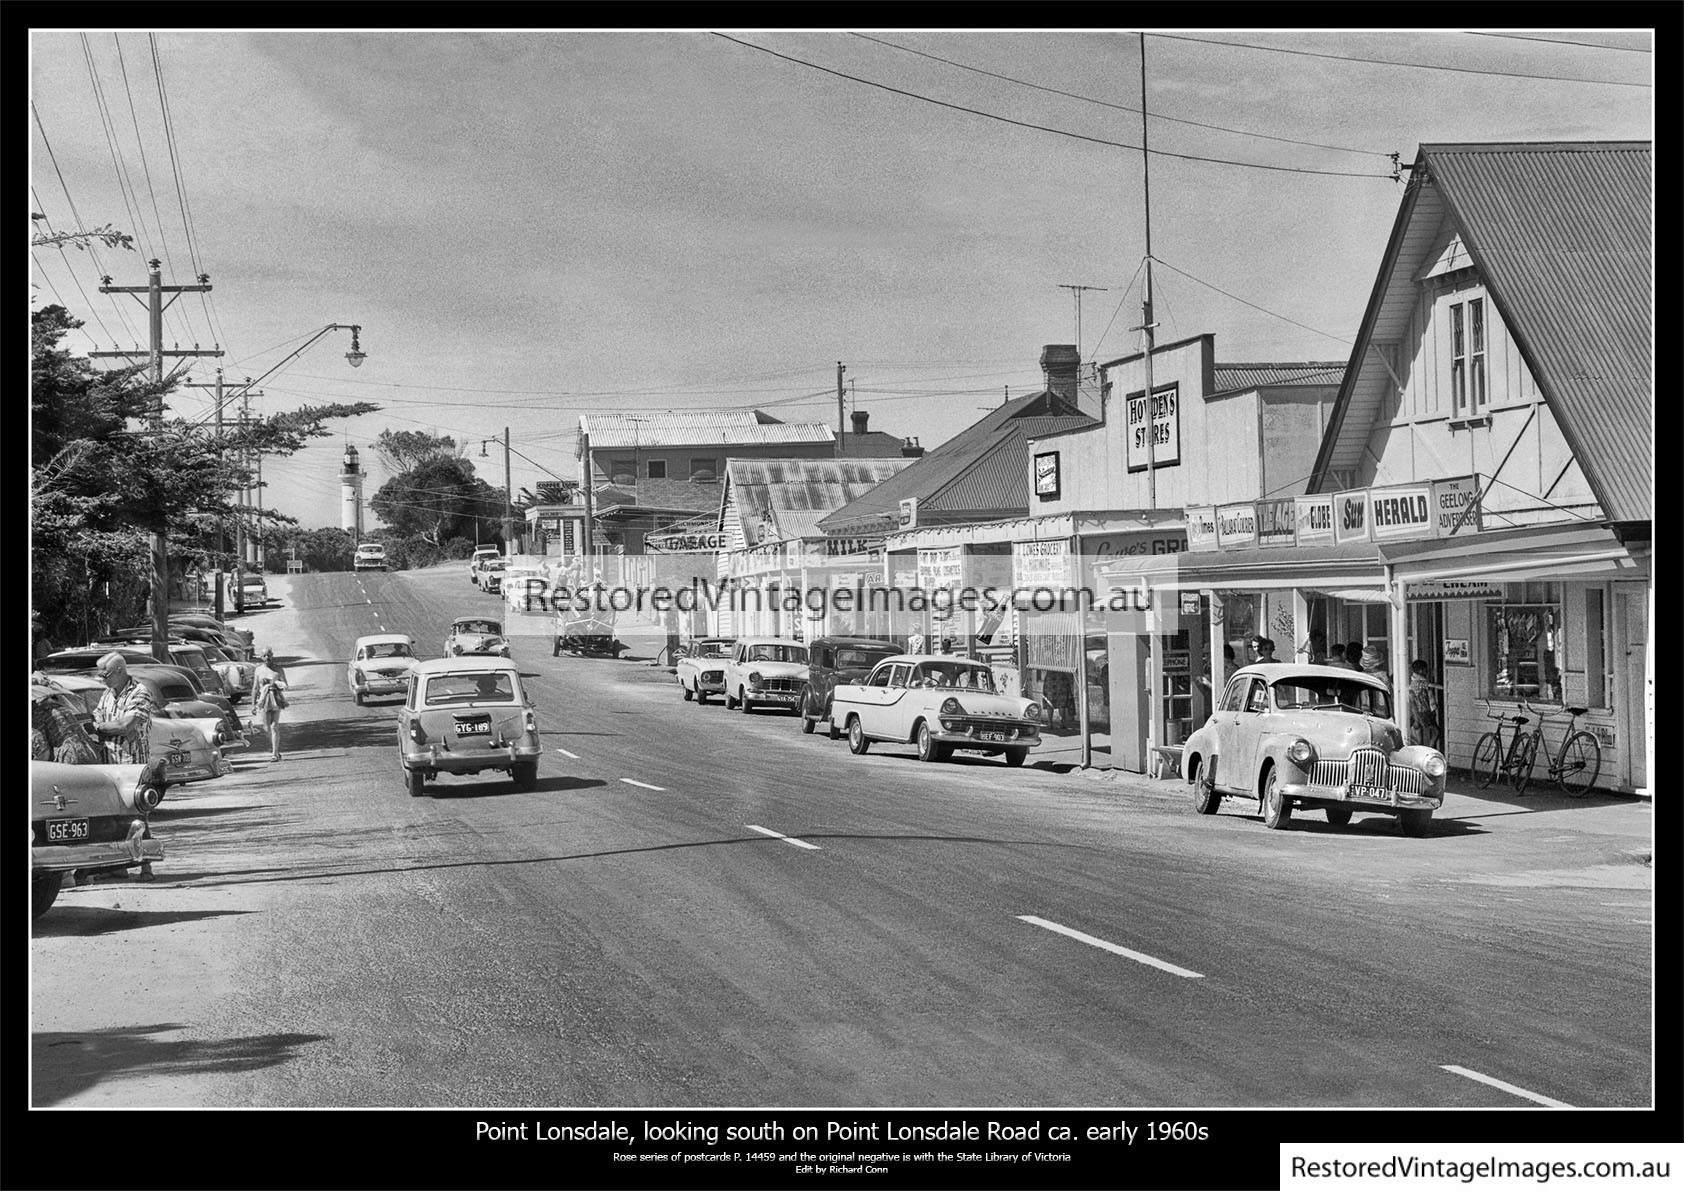 Point Lonsdale Road Looking South – Early 1960s